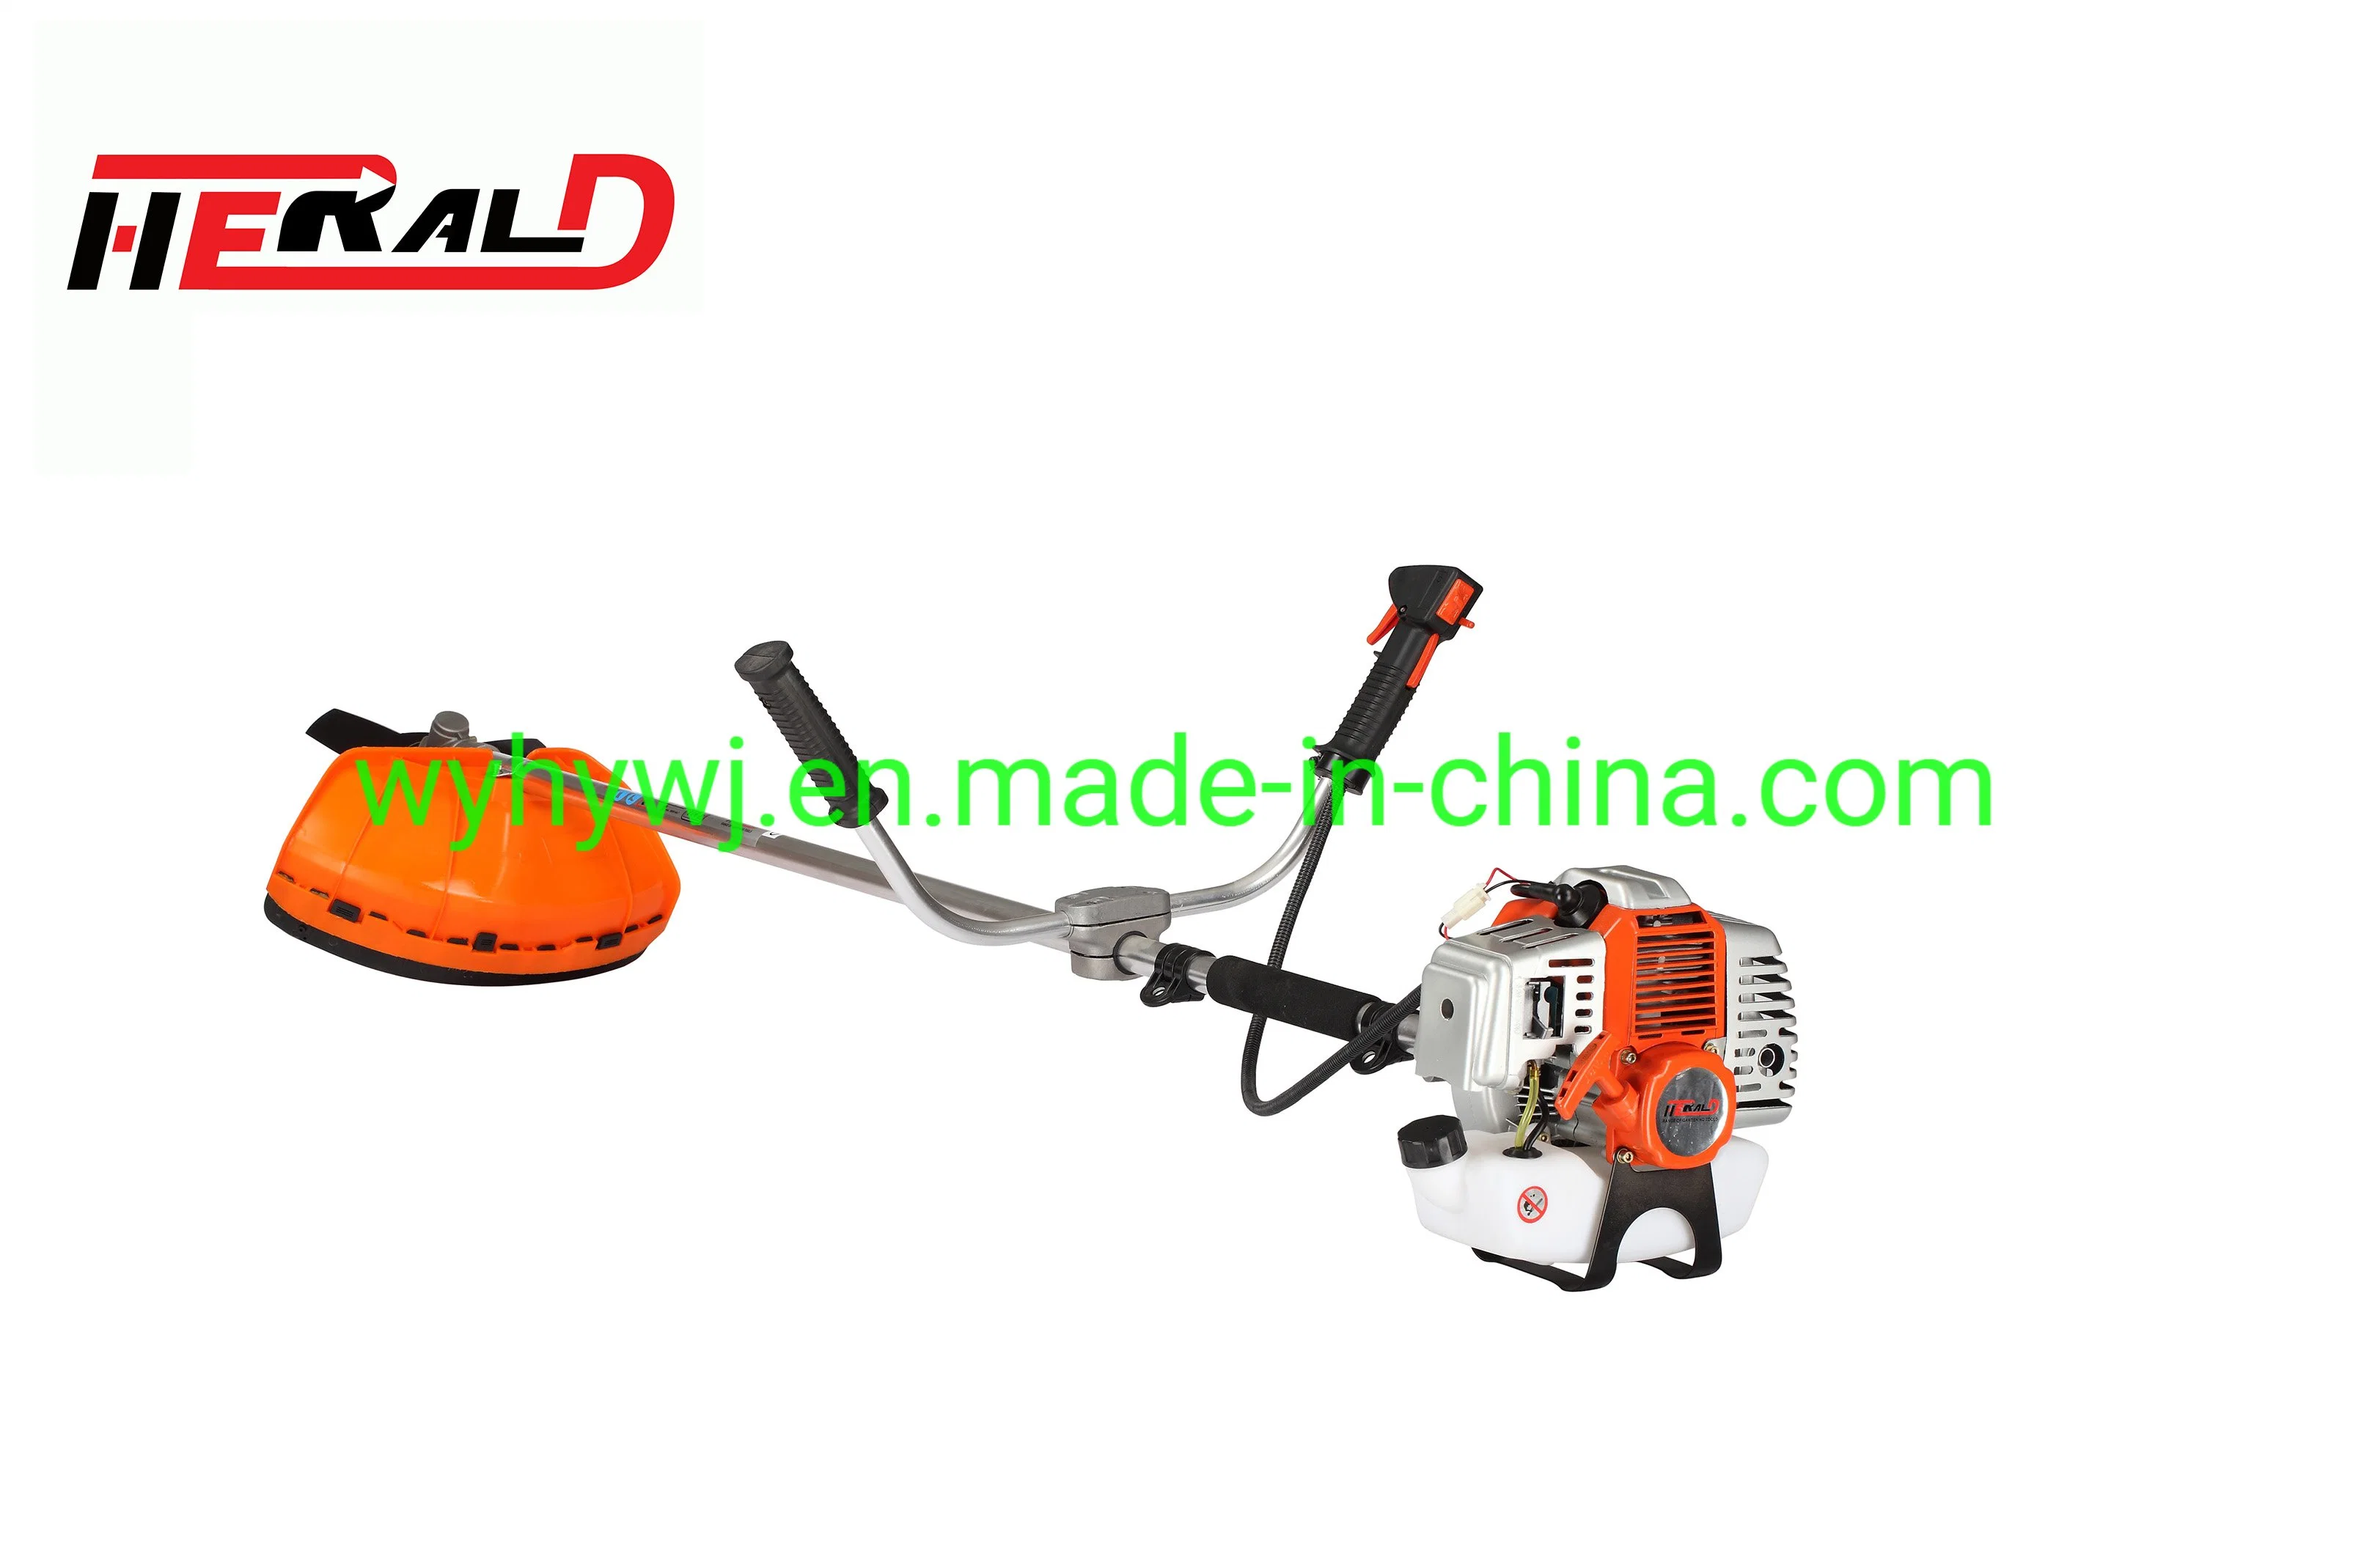 Popular Powerful Gasoline Trimmer Hy-415 Garden Tool Petrol Brush Cutter with Alloy Blade